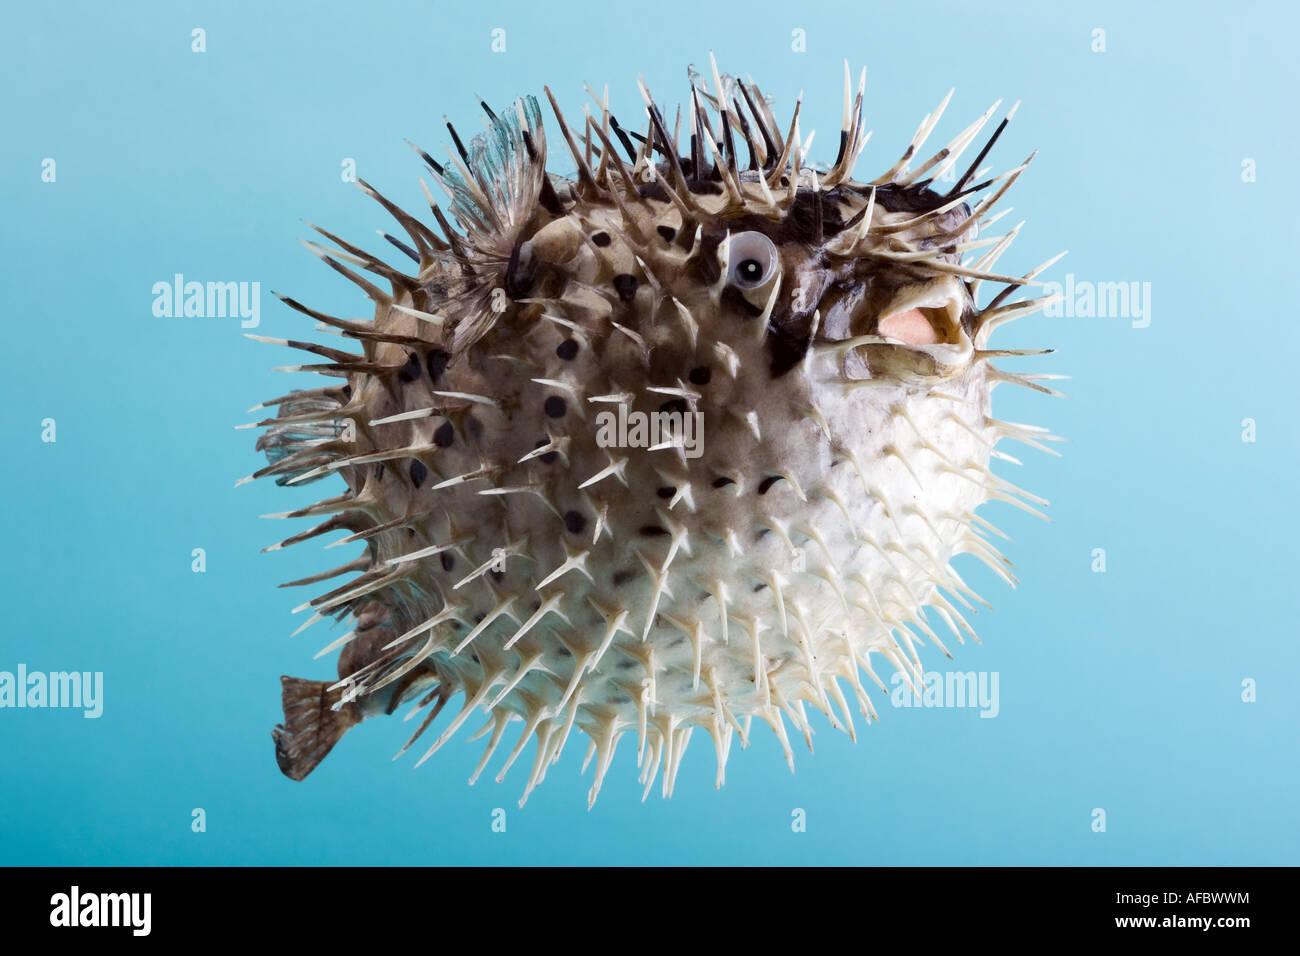 Hedgehog fish, the host at the danger of a ball shape with sharp prickles. Skin and viscera are poisonous. Stock Photo